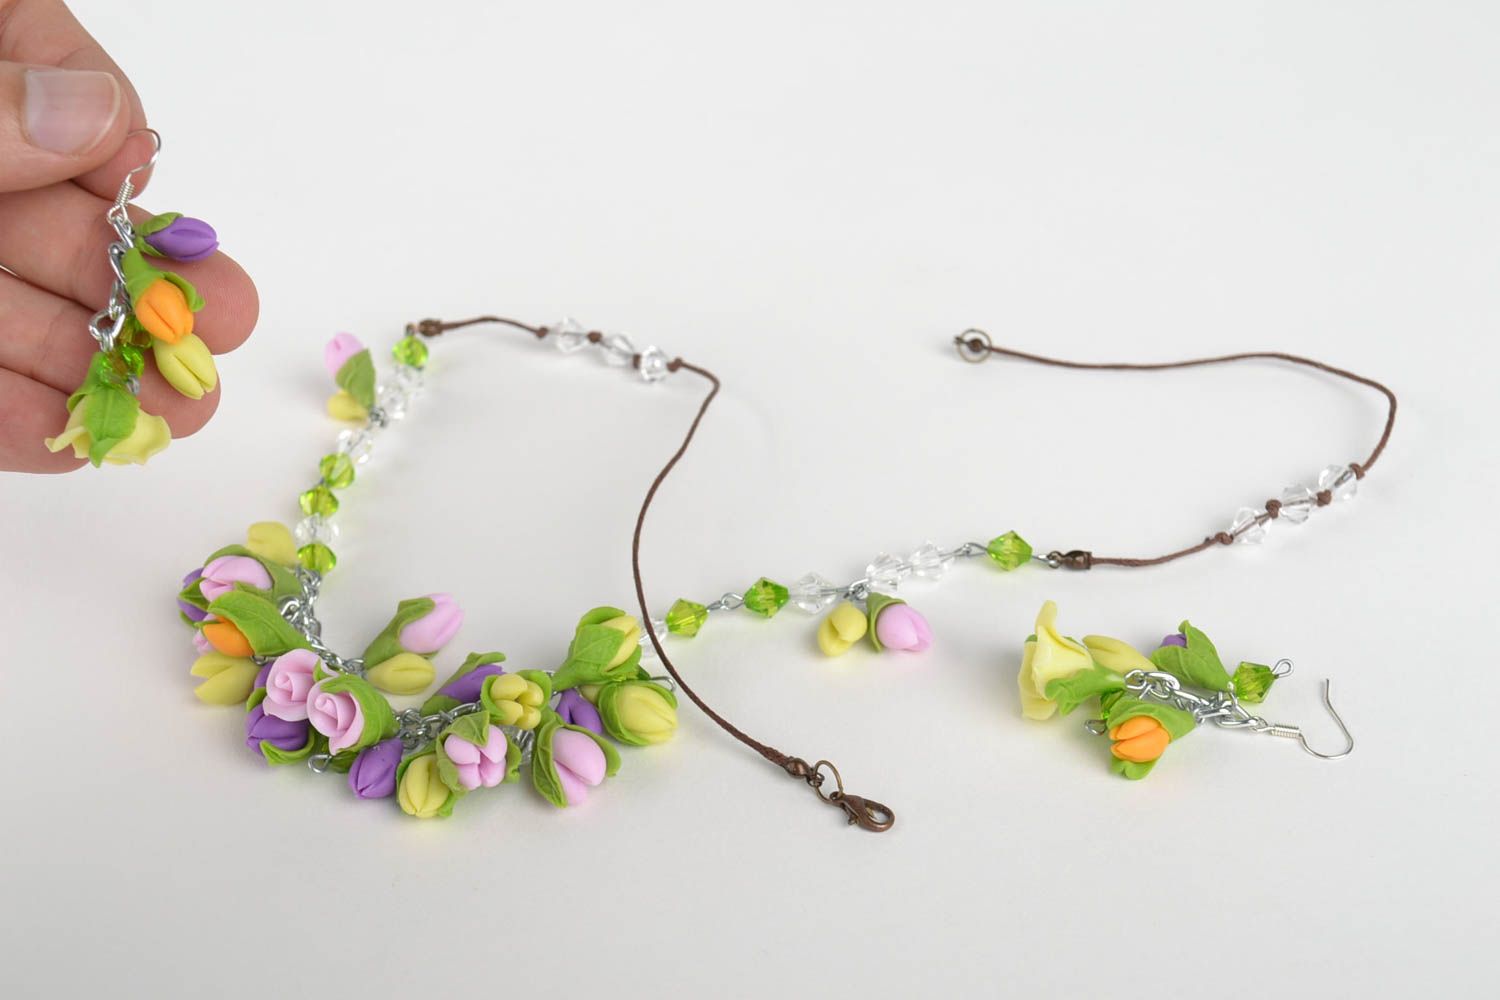 Handmade earrings and necklace with flowers designer floral bijouterie set photo 5